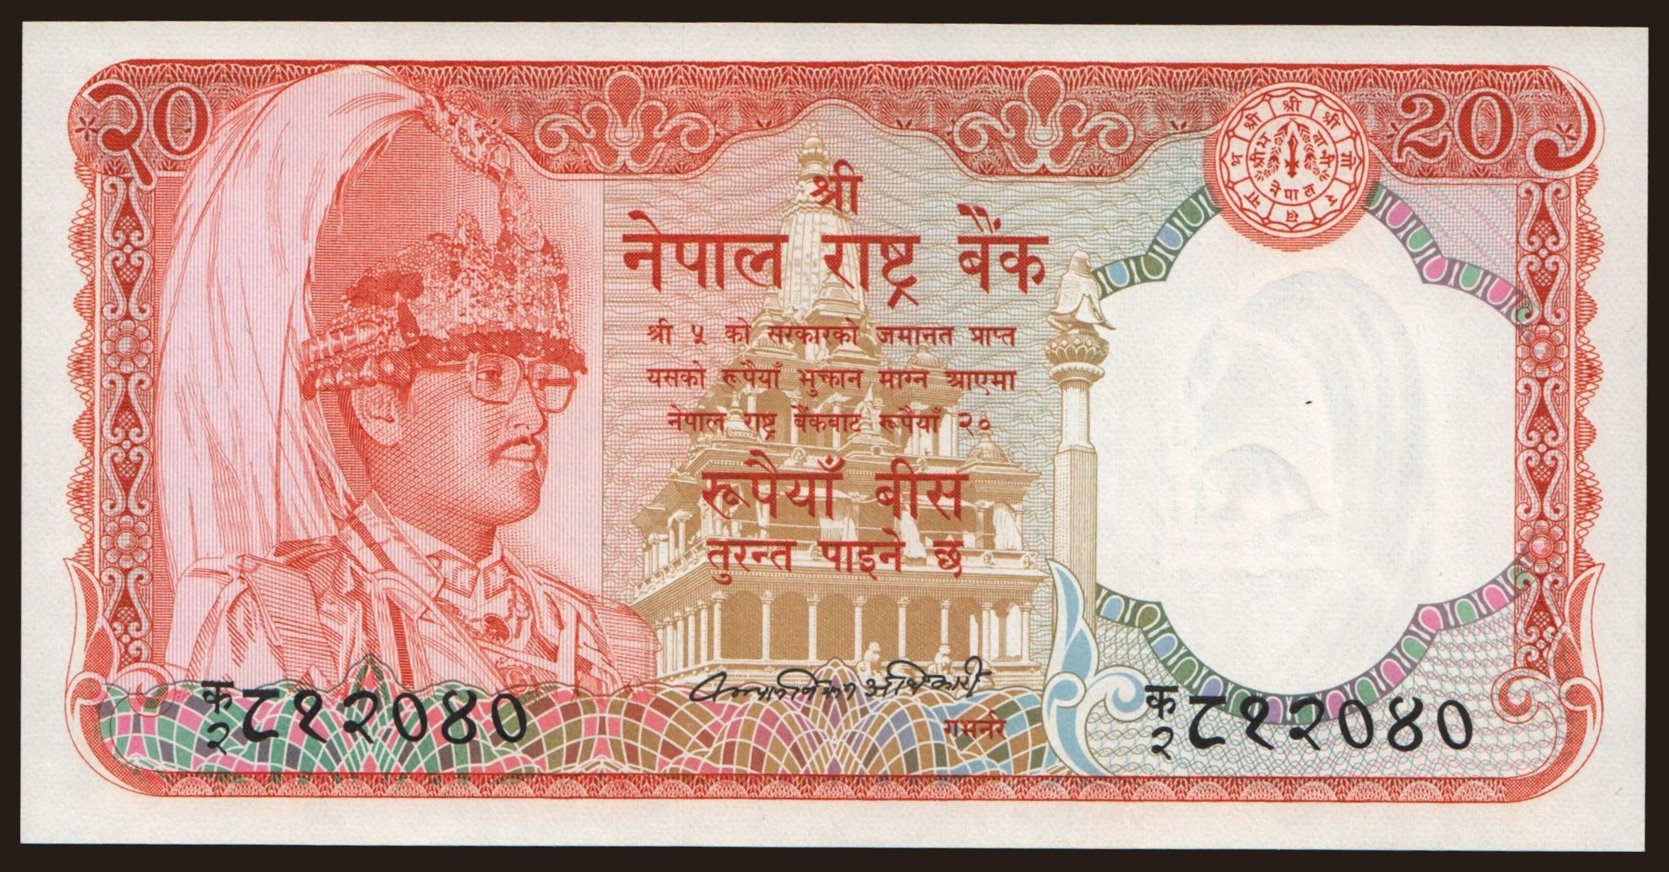 20 rupees, 1982